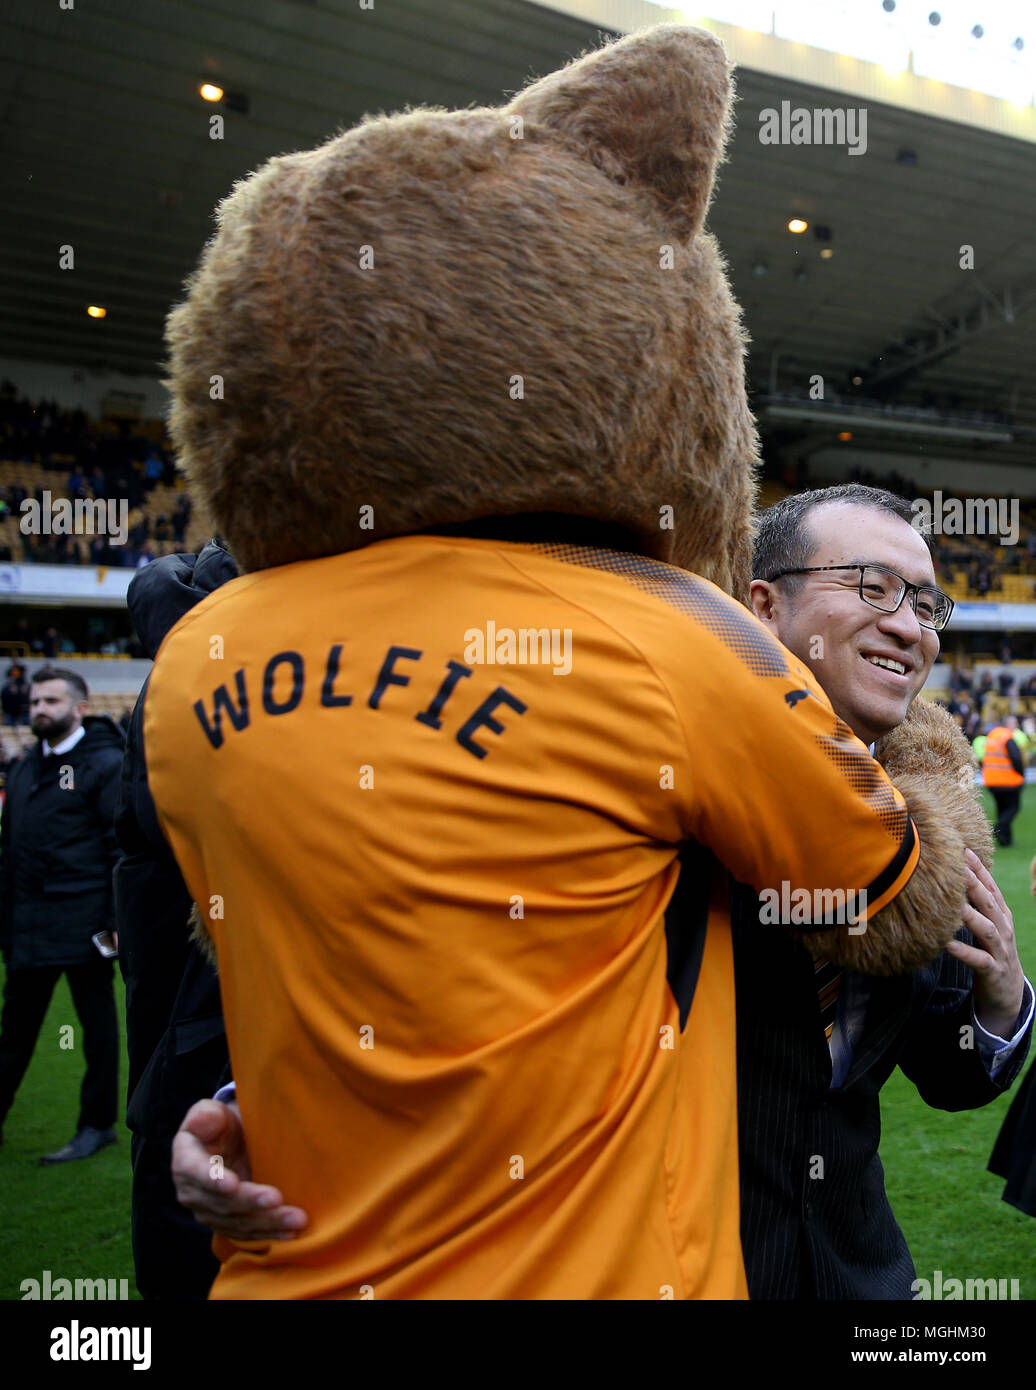 Mascot Wolfie celebrates with Executive Chairman Jeff Shi after the Sky Bet Championship match at Molineux, Wolverhampton. Stock Photo